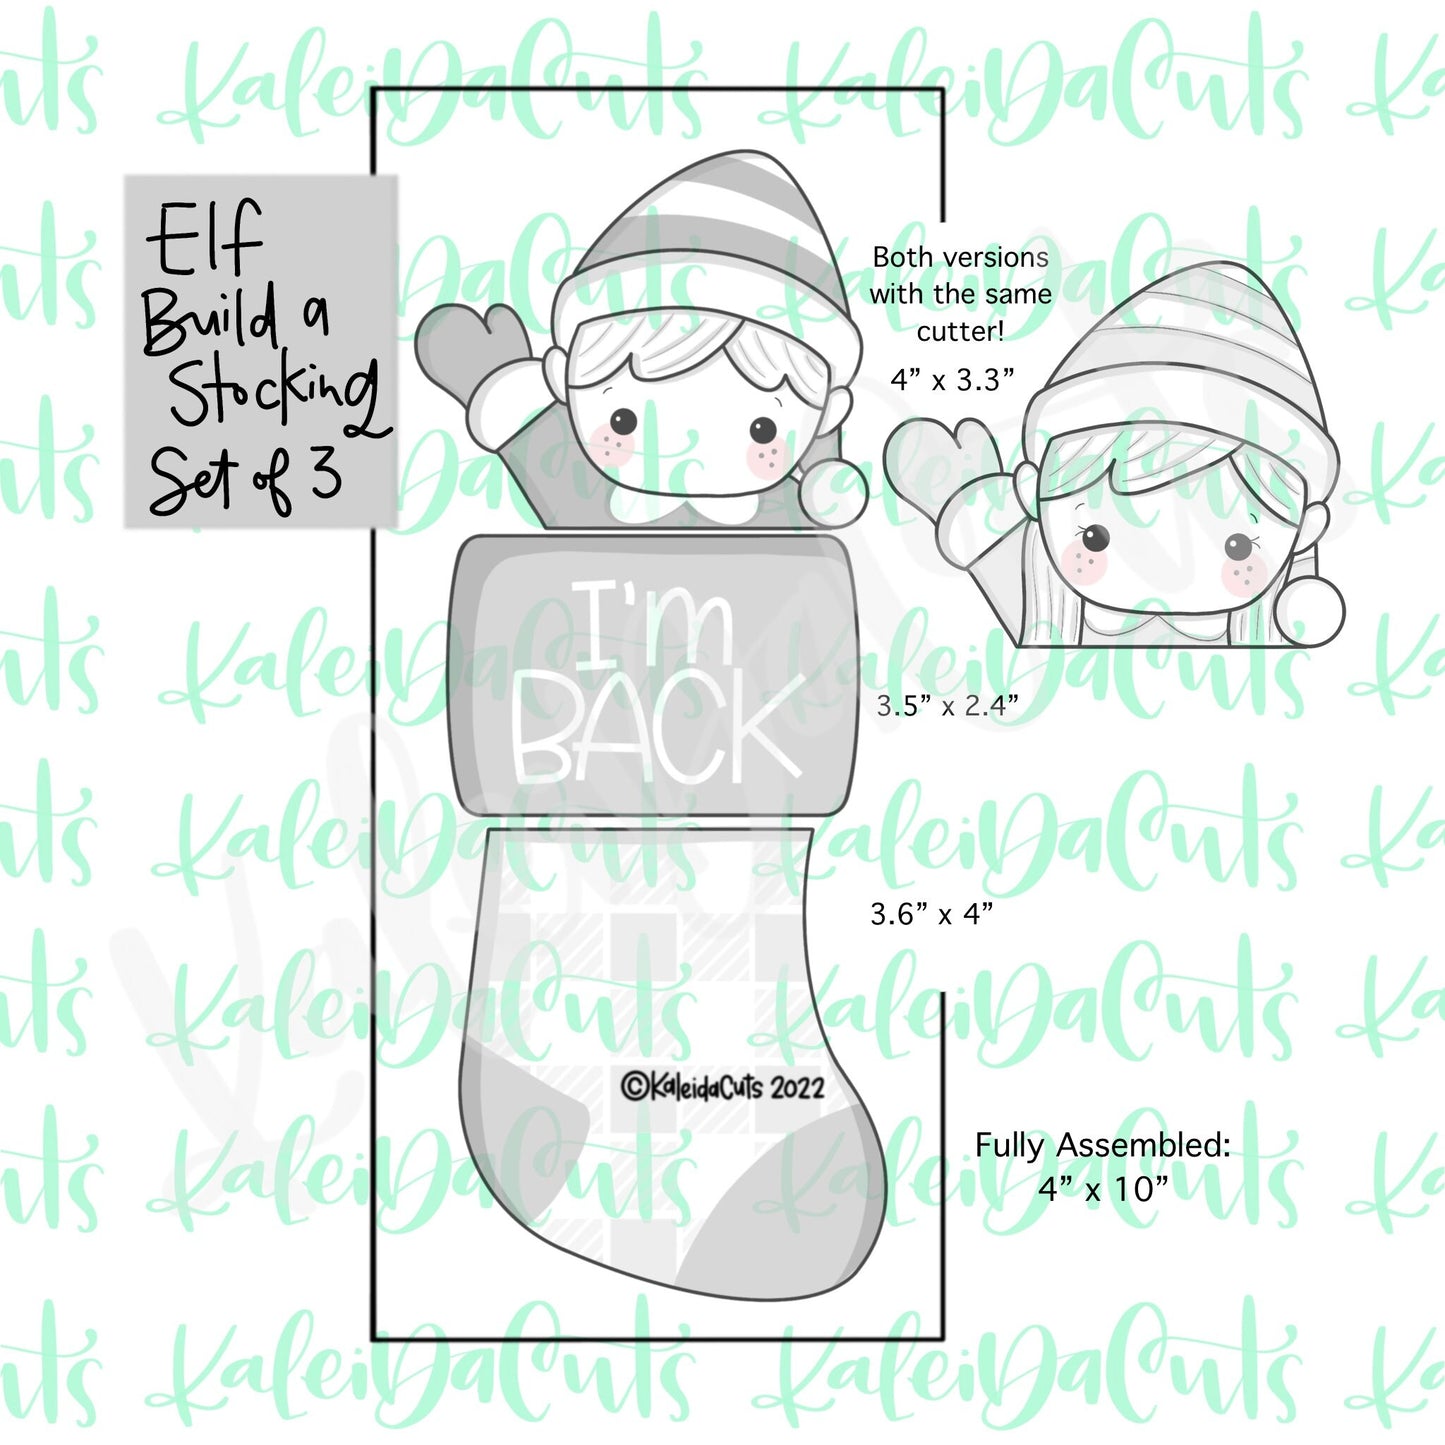 Elf Build a Stocking Set of 3 Cookie Cutters